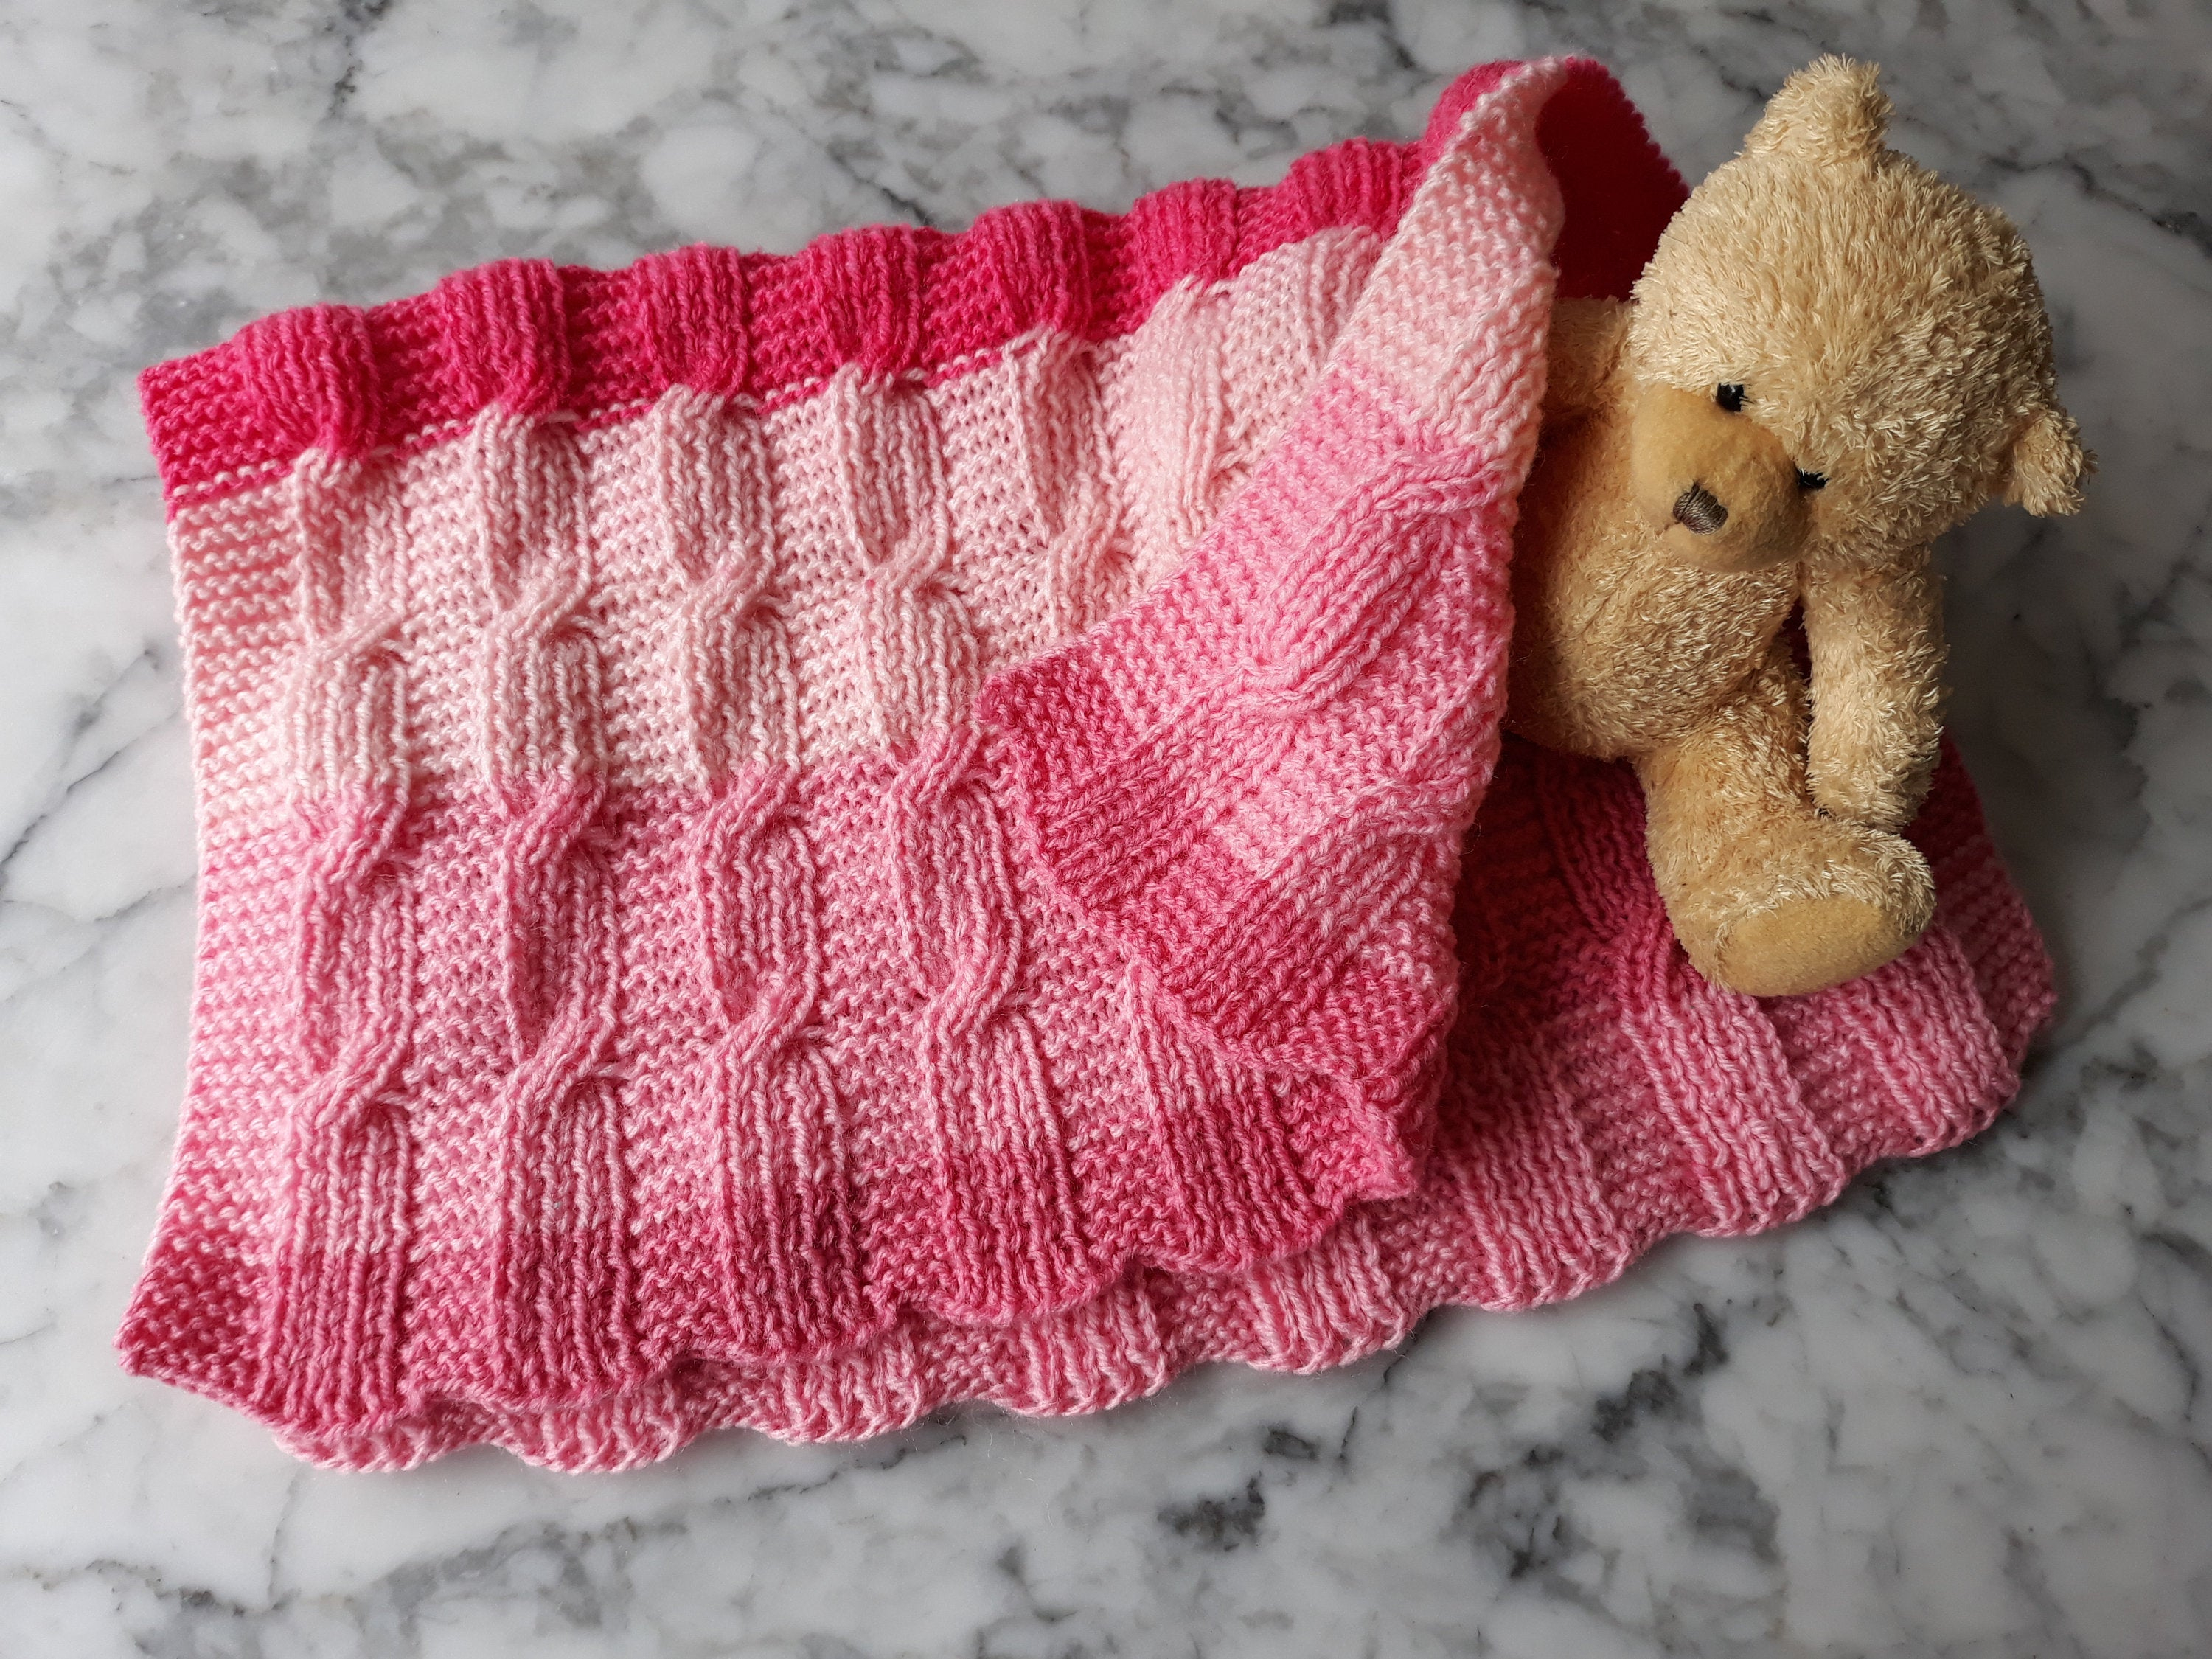 Knitting Patterns For Baby Blankets Easy Ba Blanket Knitting Pattern Instant Download Pdf Easy Aran